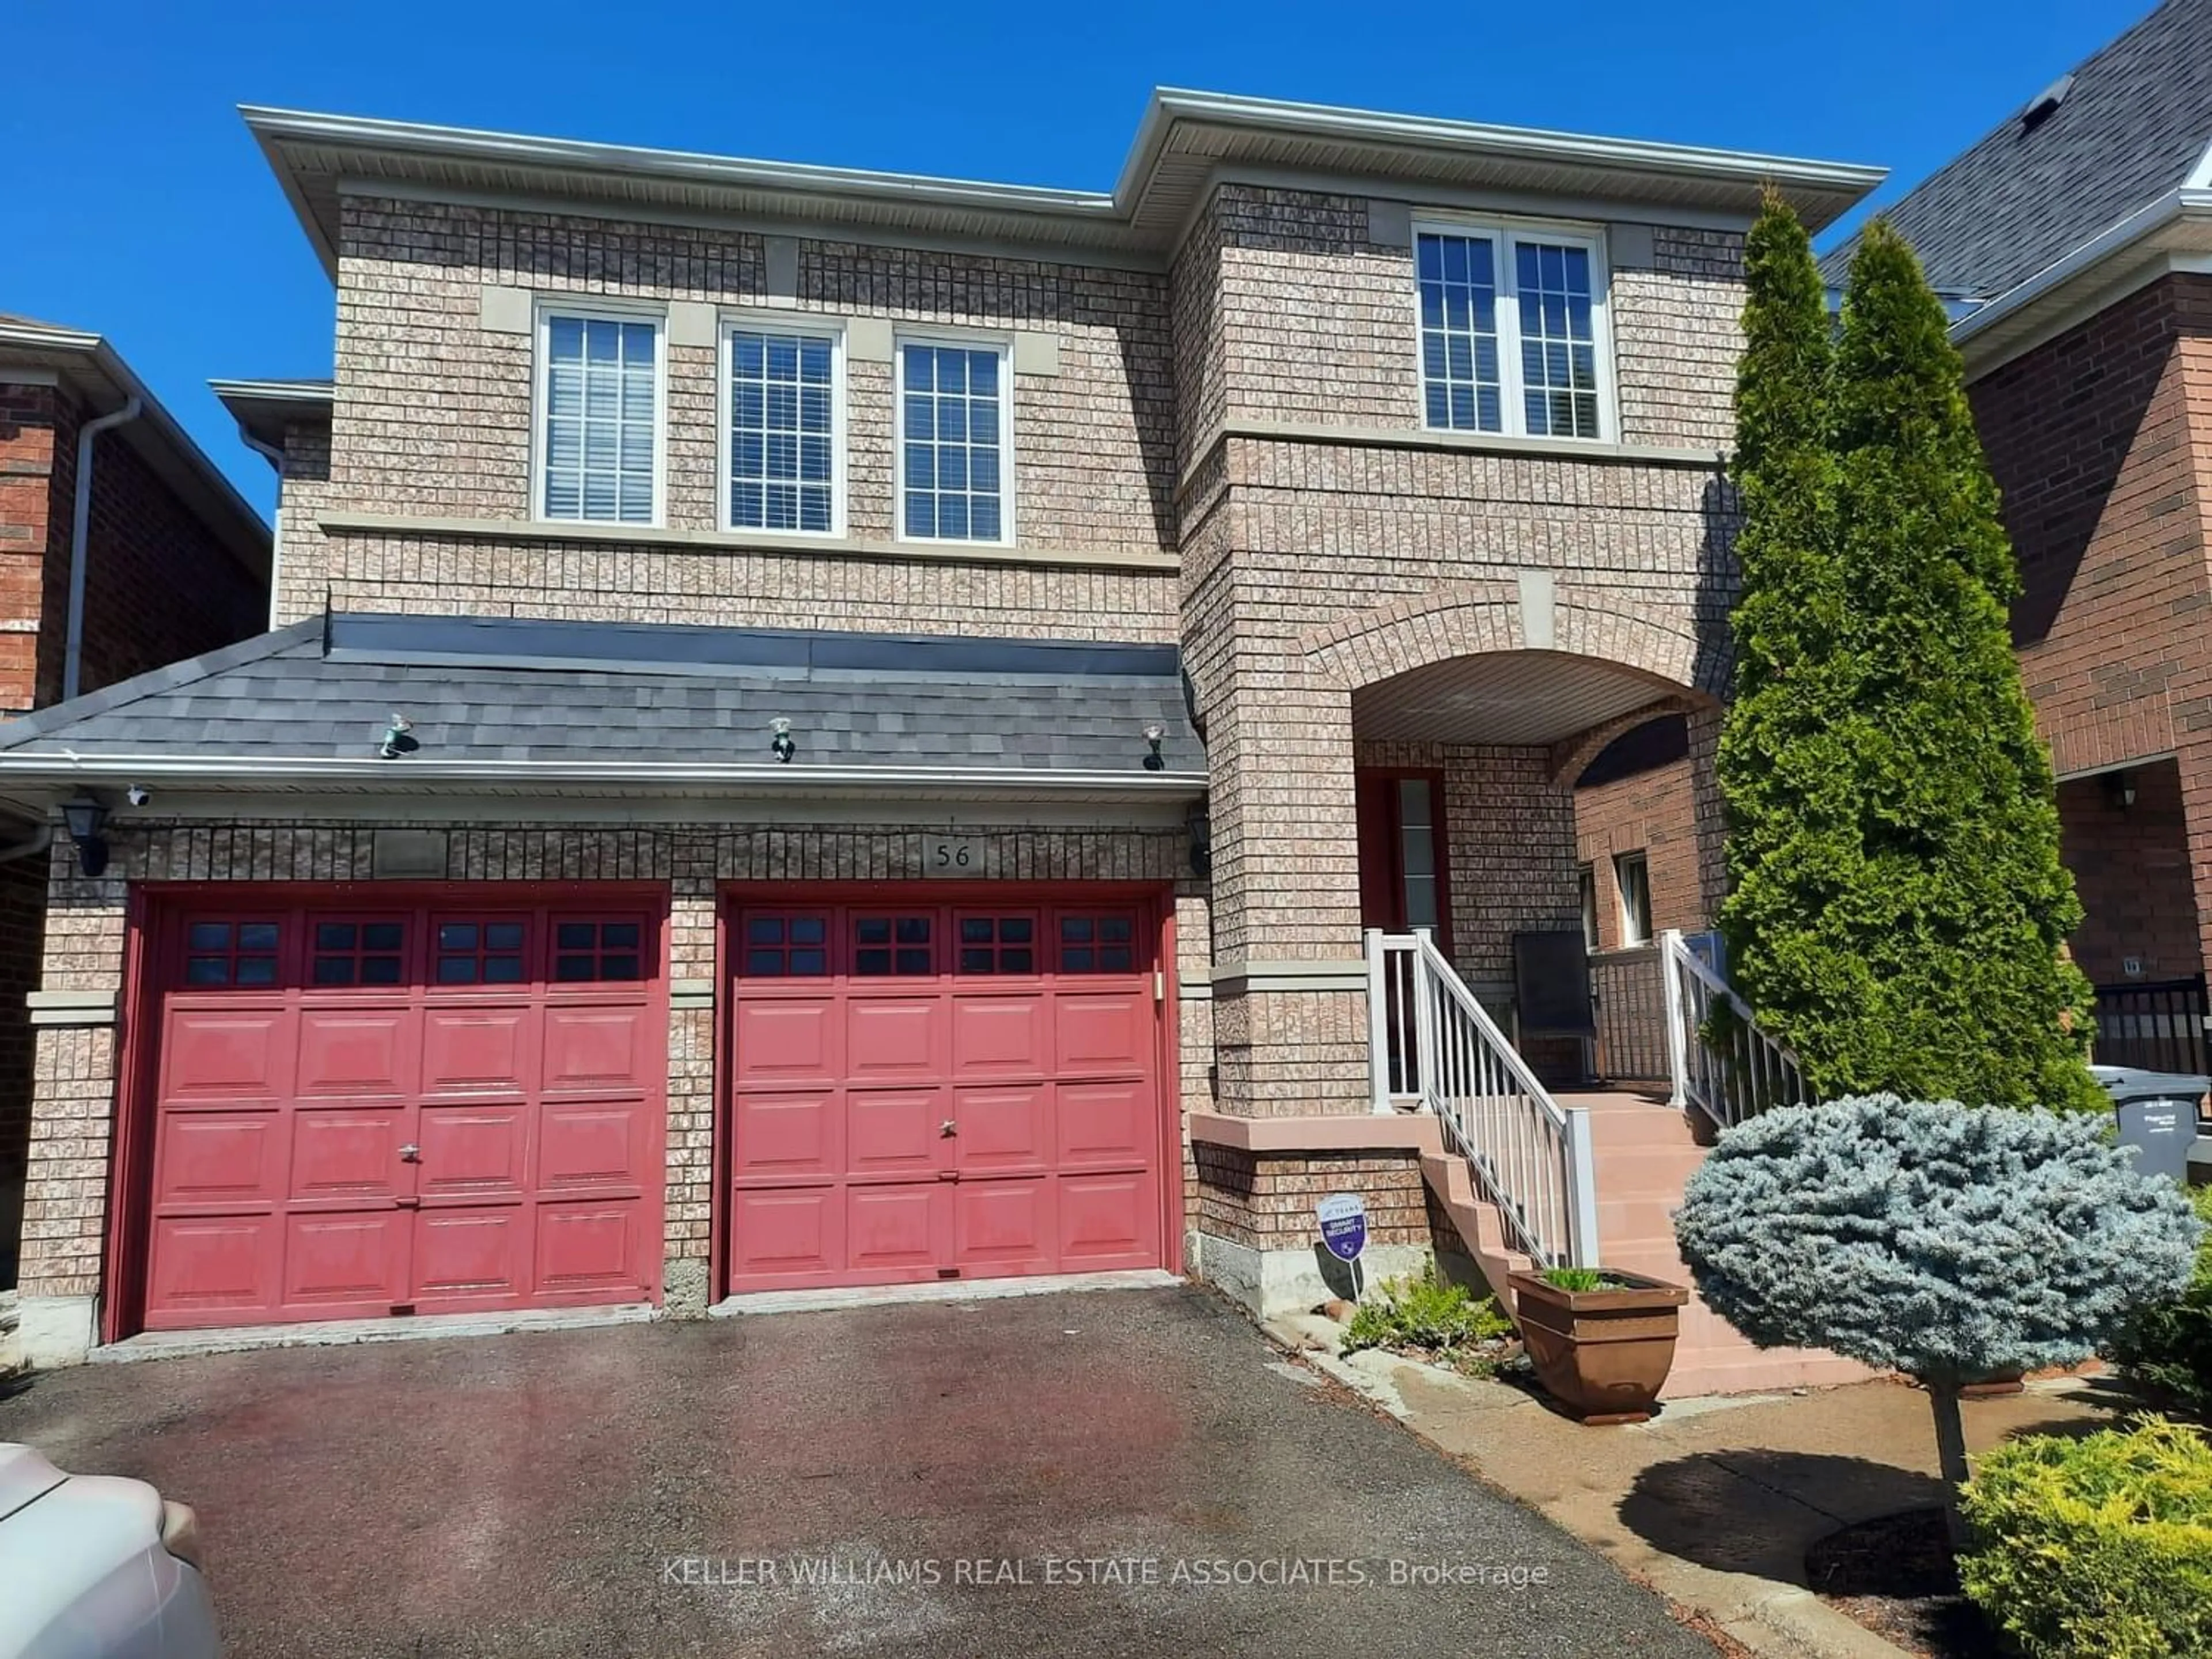 Home with brick exterior material for 56 Lockheed Cres, Brampton Ontario L7A 3G4